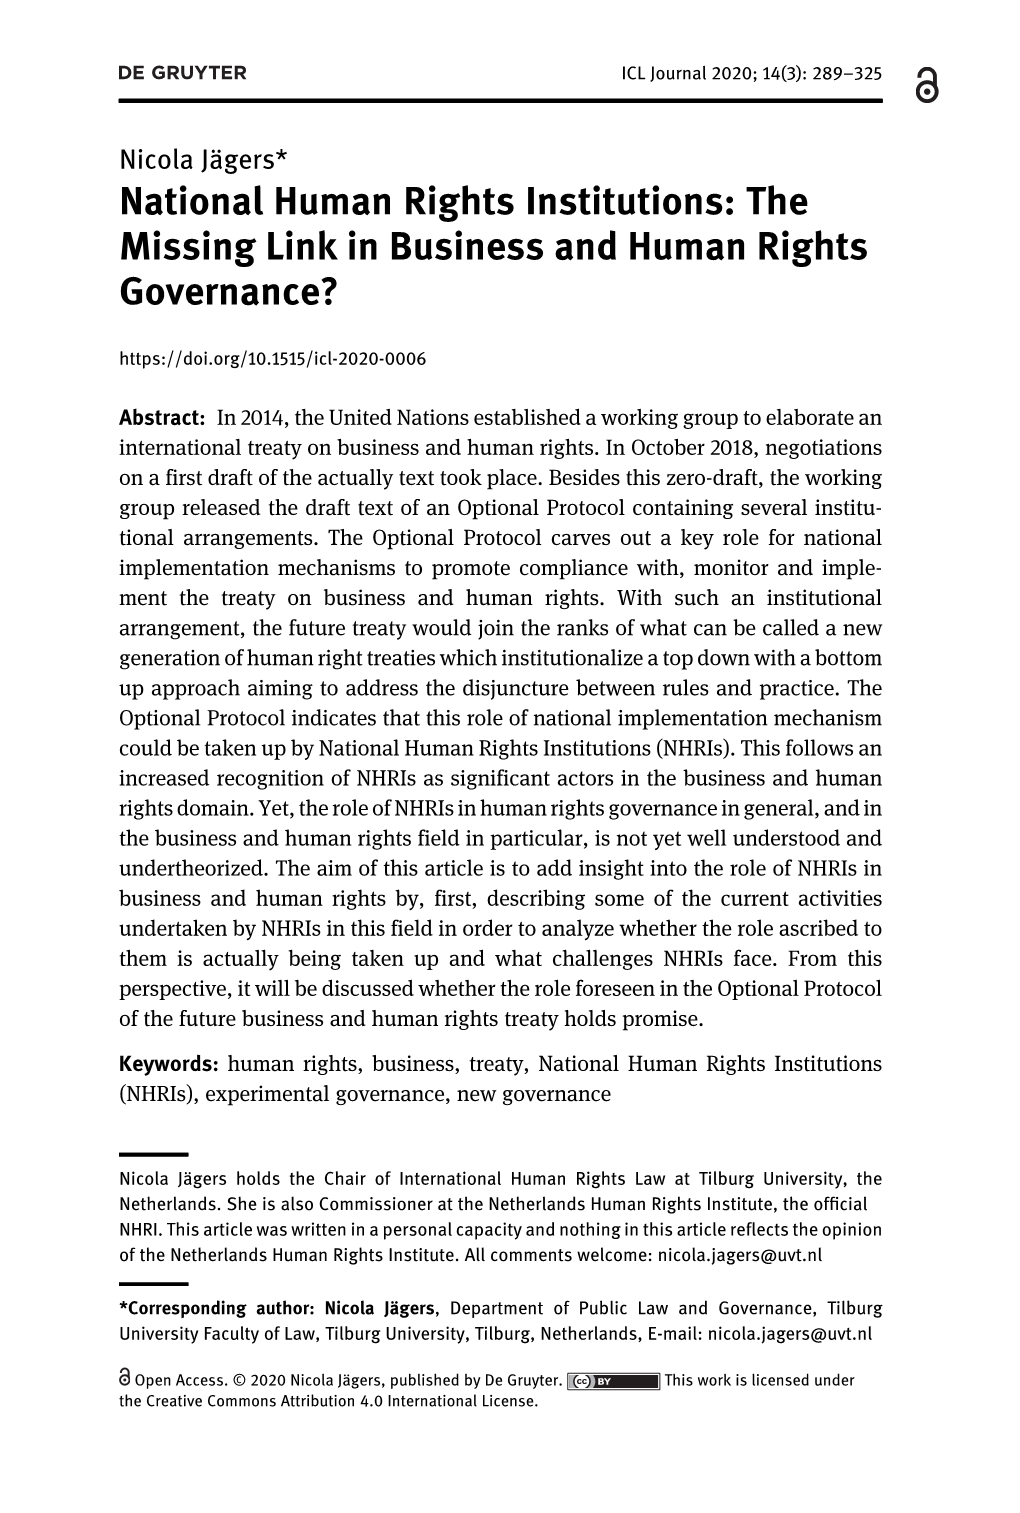 National Human Rights Institutions: the Missing Link in Business and Human Rights Governance?